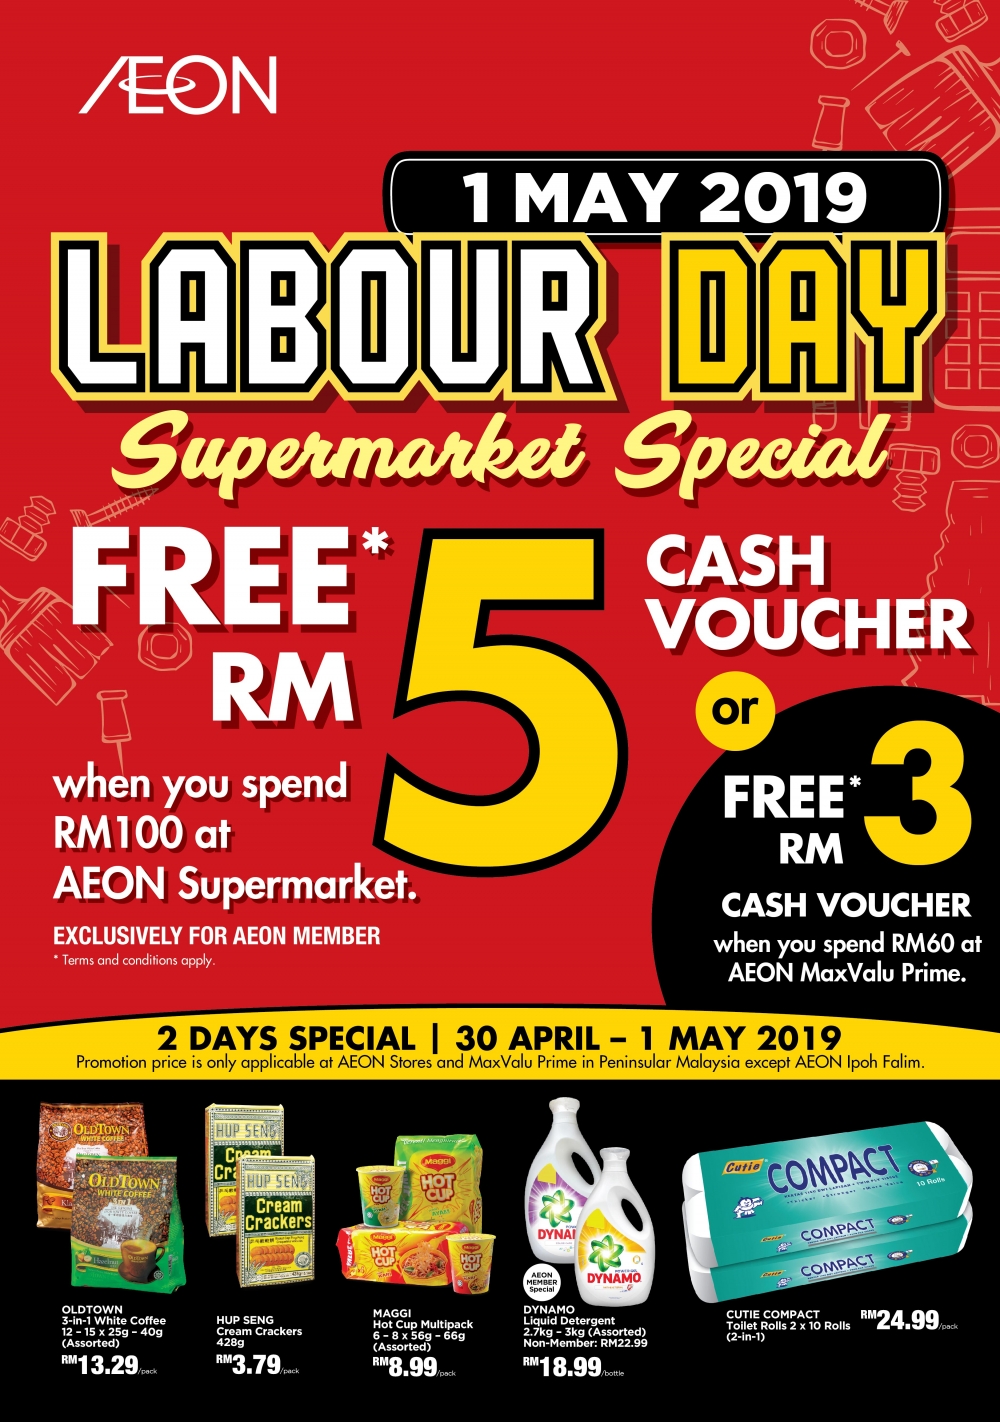 AEON Labour Day Supermarket Special - Free RM5 Voucher on Purchase